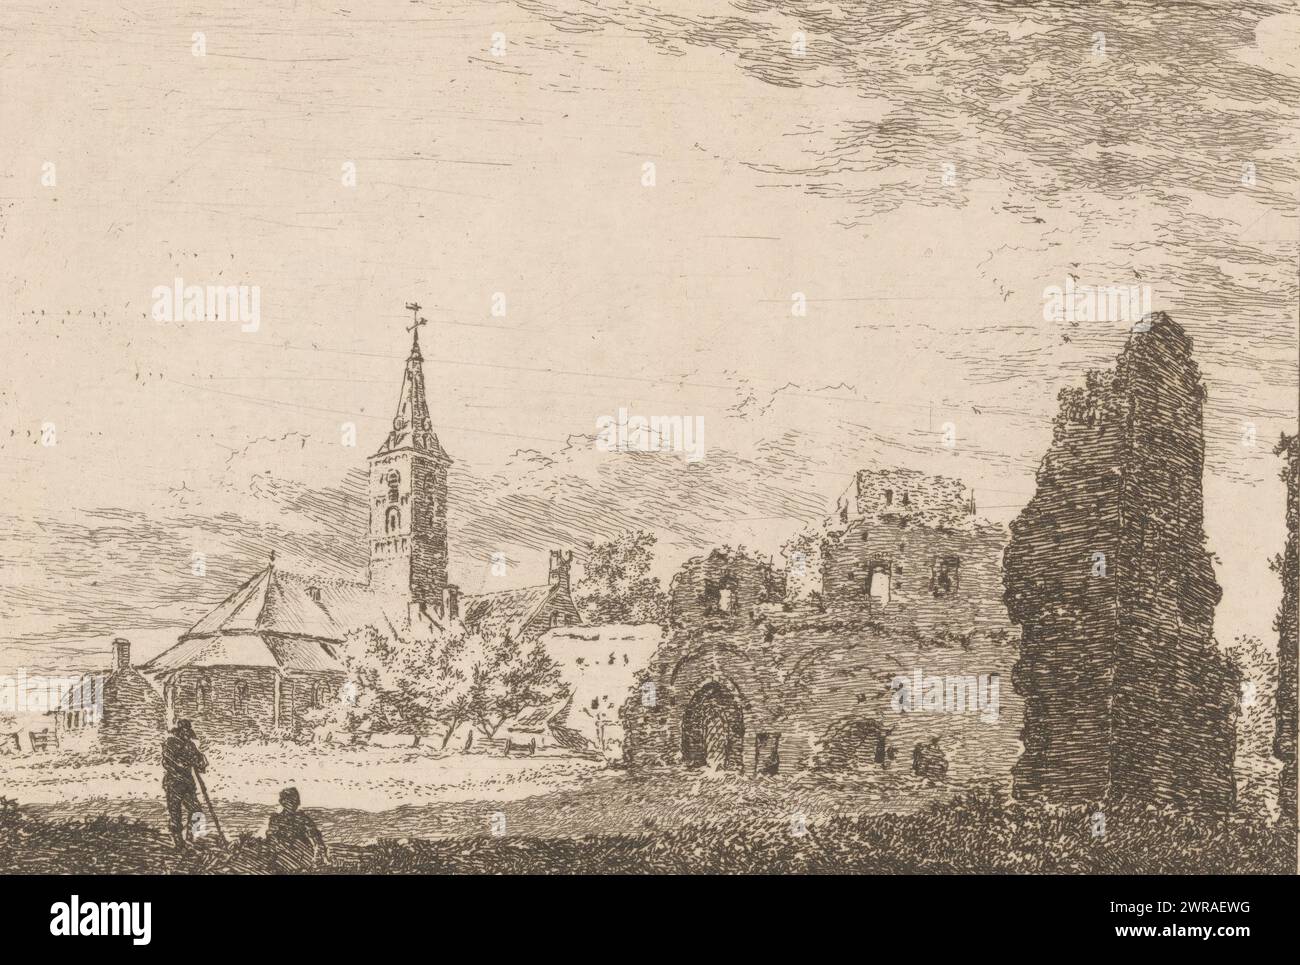 View of the church and ruins of the Rijnsburg Abbey, Abday in Rijnsburg (title on object), print maker: Hermanus van Brussel, after own design by: Hermanus van Brussel, in or after 1815, paper, etching, height 109 mm × width 161 mm, print Stock Photo